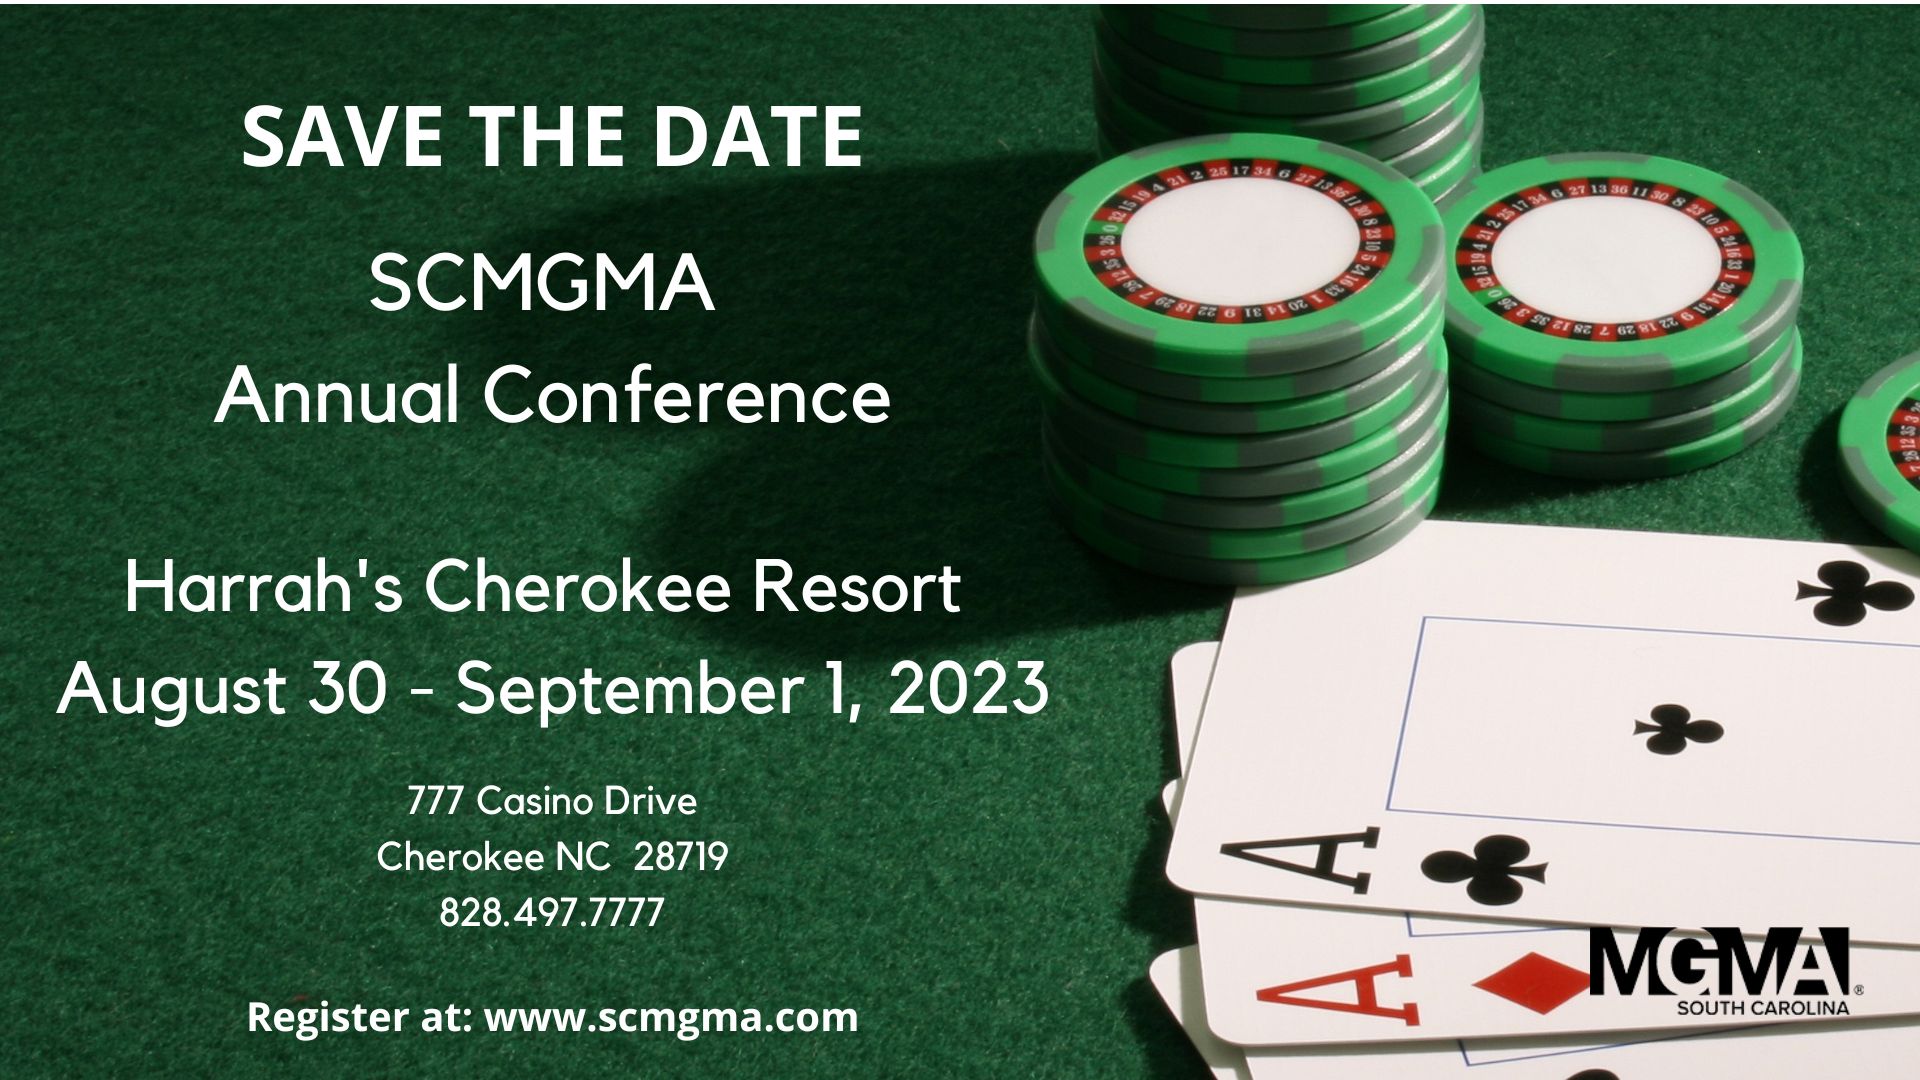 Copy of Save the Date SCMGMA 2023 Conference 002